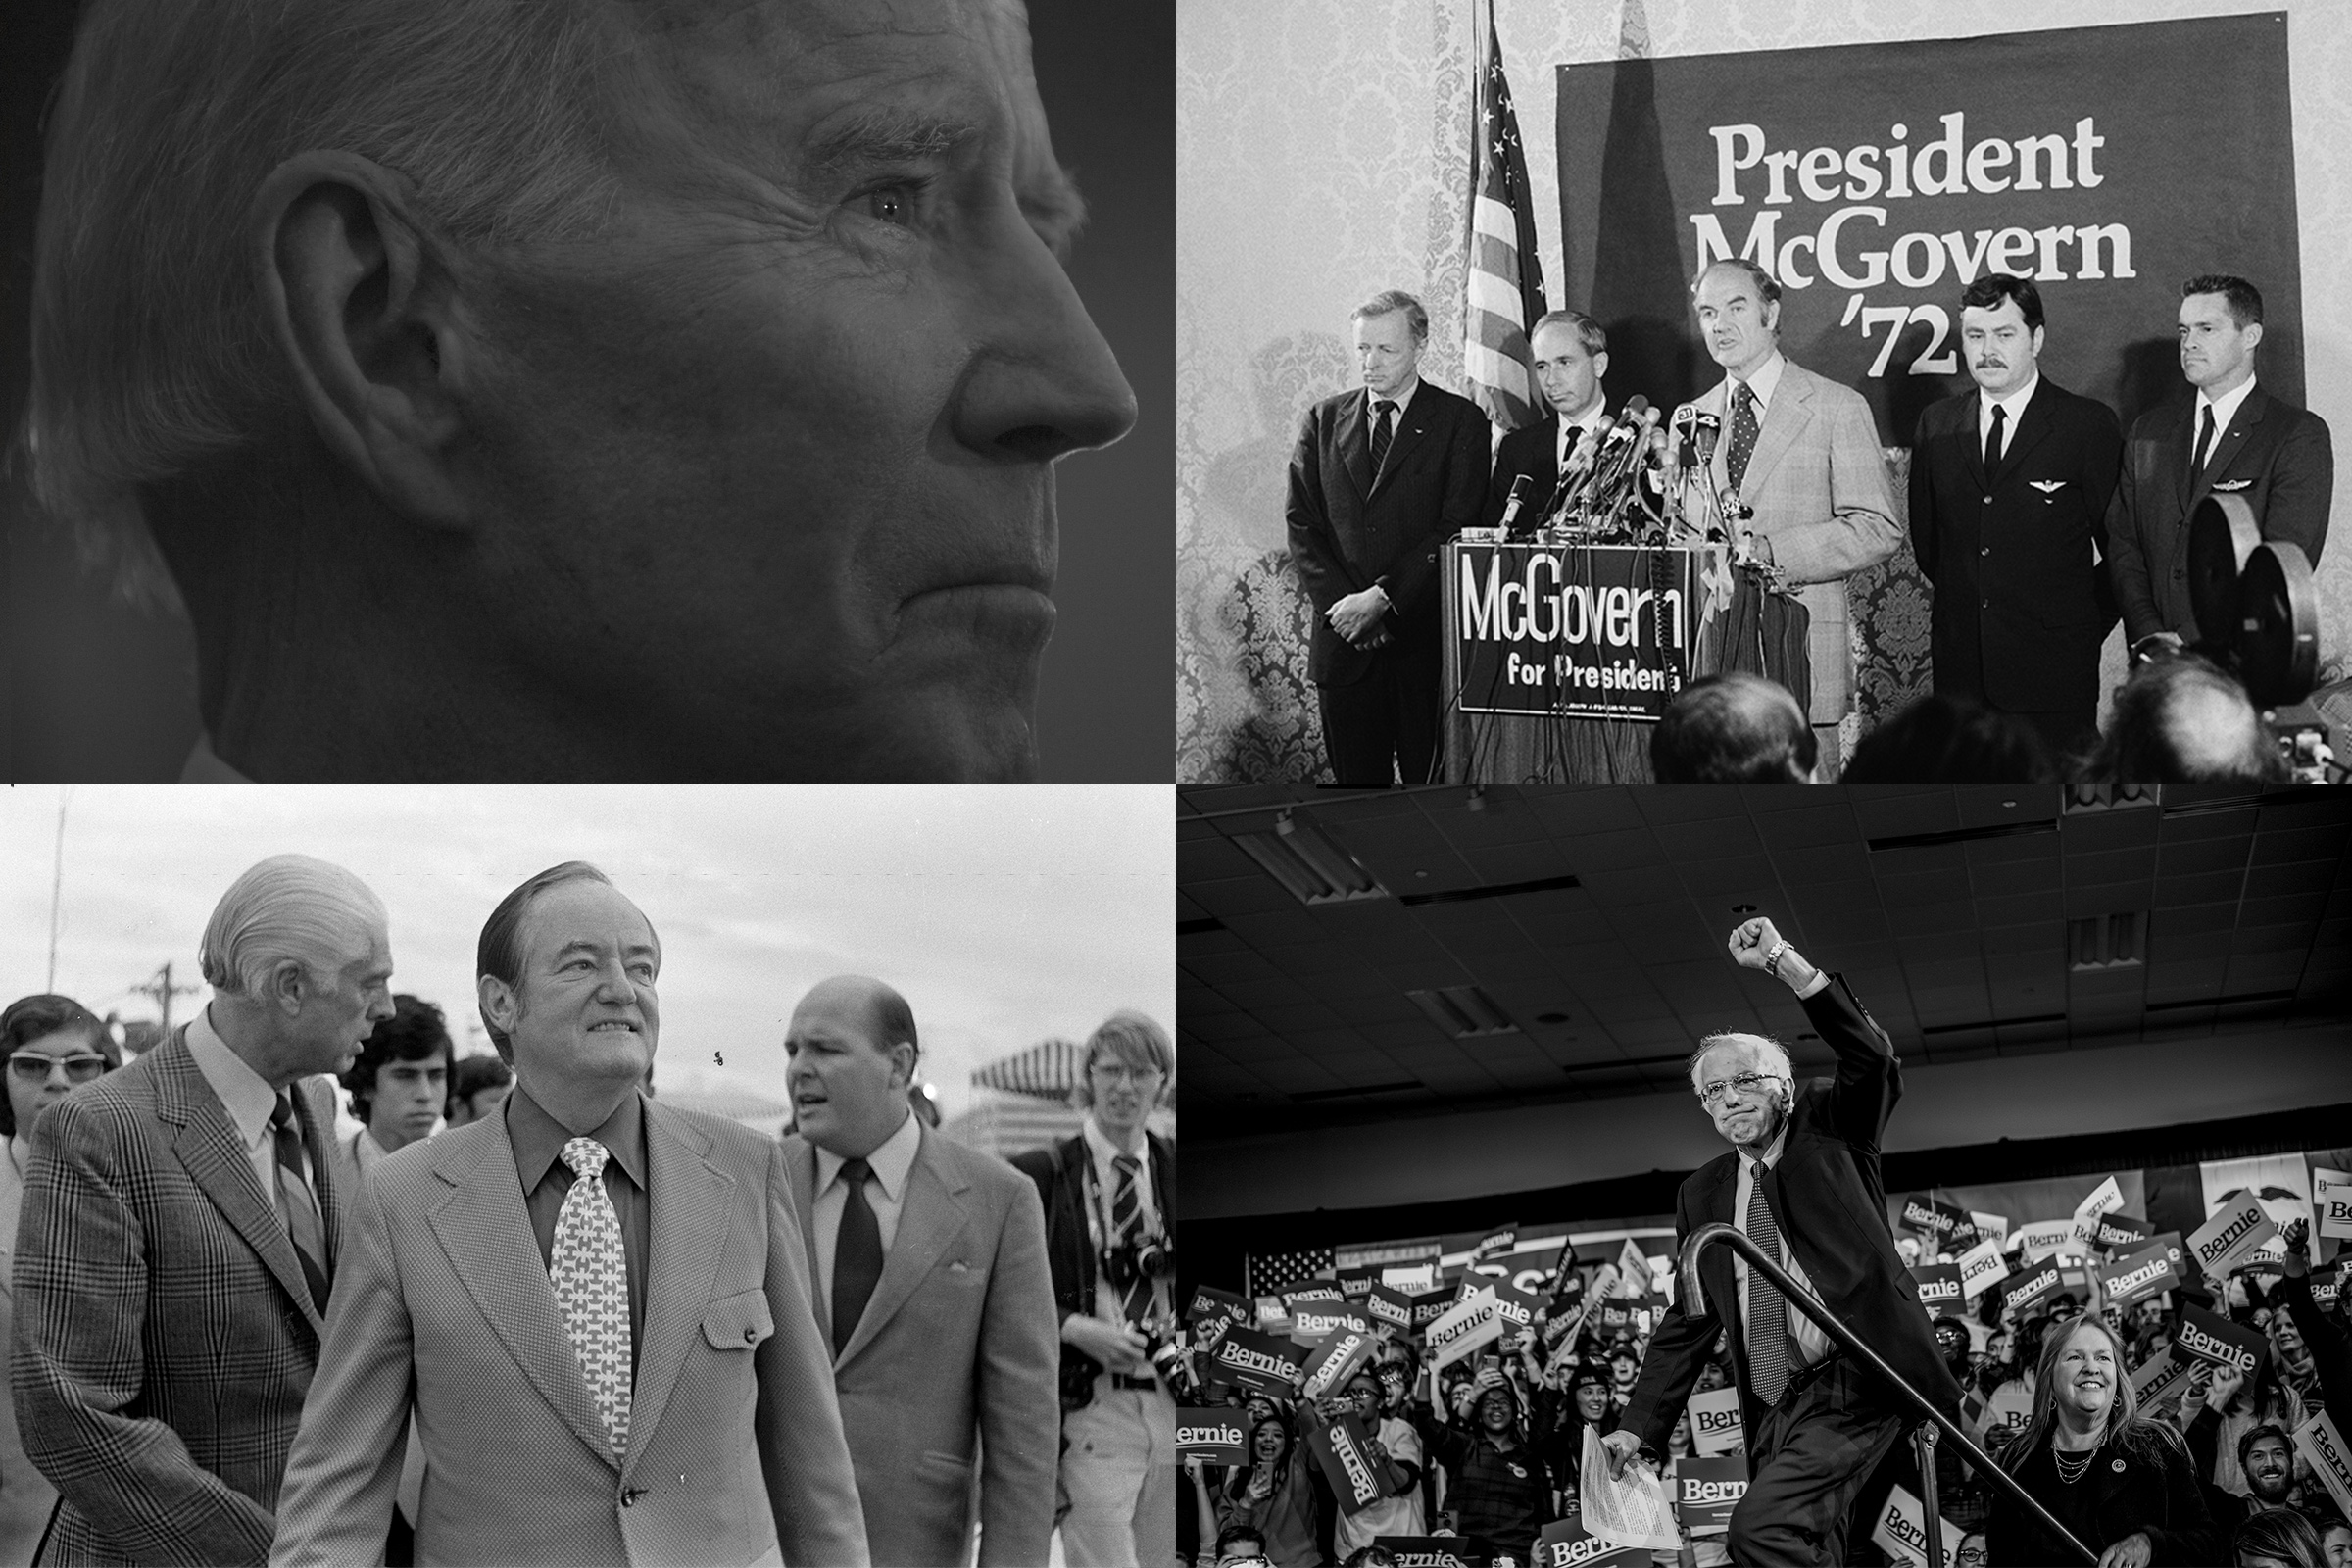 From top left, clockwise: Joe Biden during a community event in Fort Dodge, Iowa, on Jan. 21; George McGovern urges U.N. Security Council to take action to prevent air hijackings in New York June 19, 1972; Bernie Sanders during a rally at the Holiday Inn in Des Moines, Iowa, on Feb. 3; Hubert Humphrey visits the Miami airport during the Democratic National Convention in Florida on July 10, 1972. (September Dawn Bottoms for TIME; Bettmann Archive/Getty Images; Devin Yalkin for TIME; Fairchild Archive—Penske Media/Shutterstock)